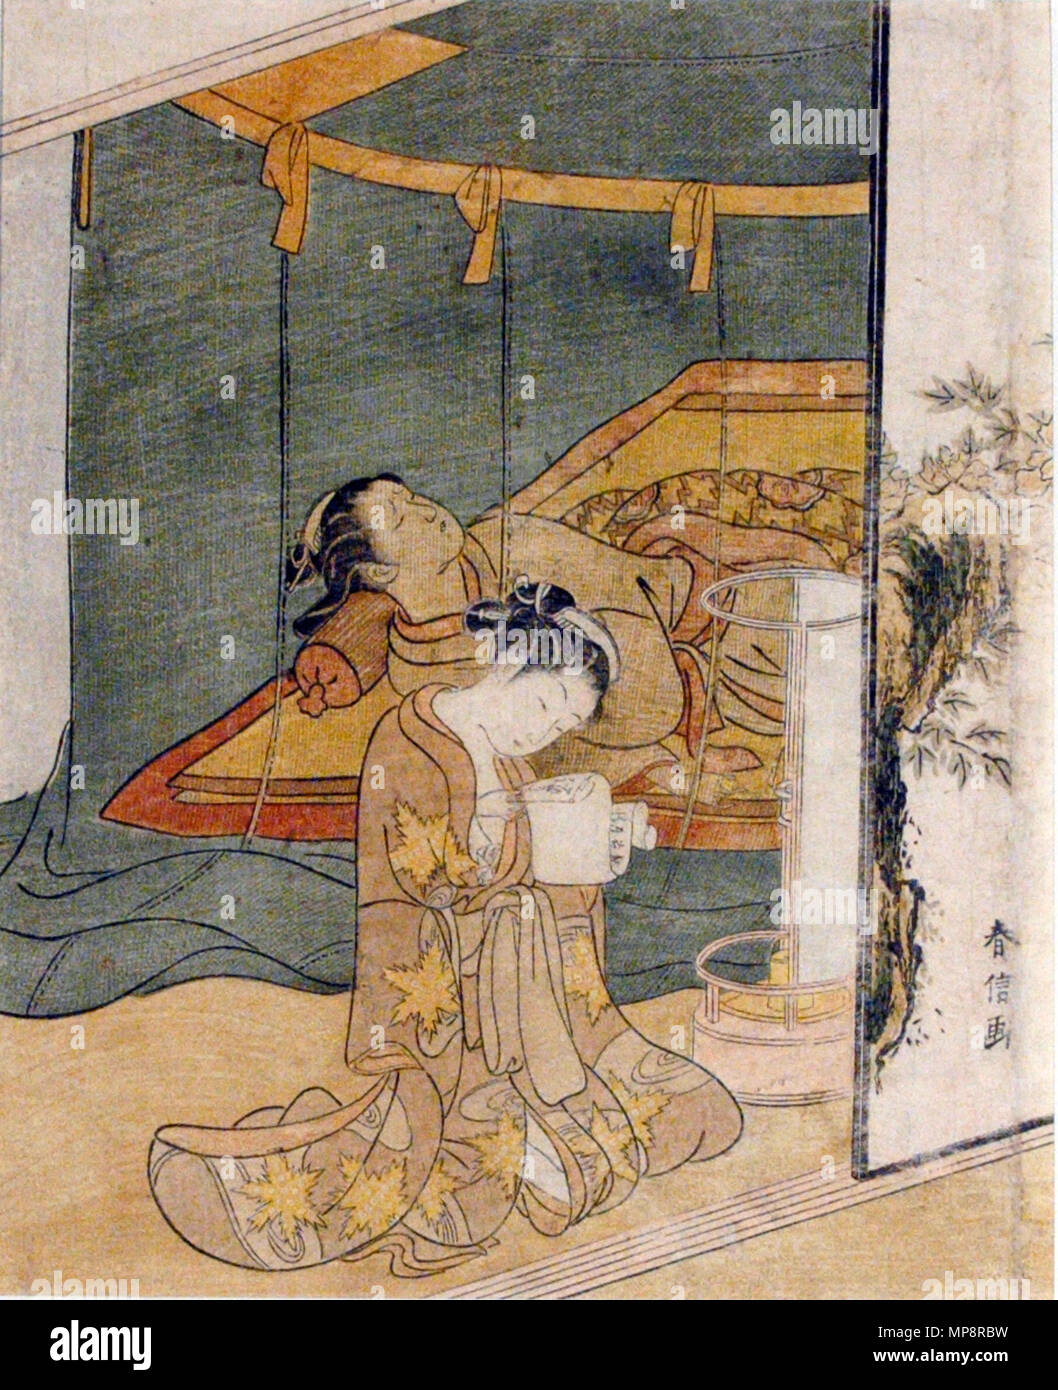 . English: Accession Number: 1957.80 Display Artist: Suzuki Harunobu Display Title: Young woman reading a letter at night while another sleeps behind a mosquito net Translation(s): Mujer Joven Leyendo una Carta Mientras Duerme su Madre Creation Date: 1768-1770 Medium: Woodblock Height: 10 5/16 in. Width: 8 5/16 in. Display Dimensions: 10 5/16 in. x 8 5/16 in. (26.19 cm x 21.11 cm) Credit Line: Bequest of Mrs. Cora Timken Burnett Label Copy: 'One of the pioneering artists of Ukiyo-e, Harunobu perfected the art of the full-color print, which was called nishiki-e or brocade print. Here, with his  Stock Photo